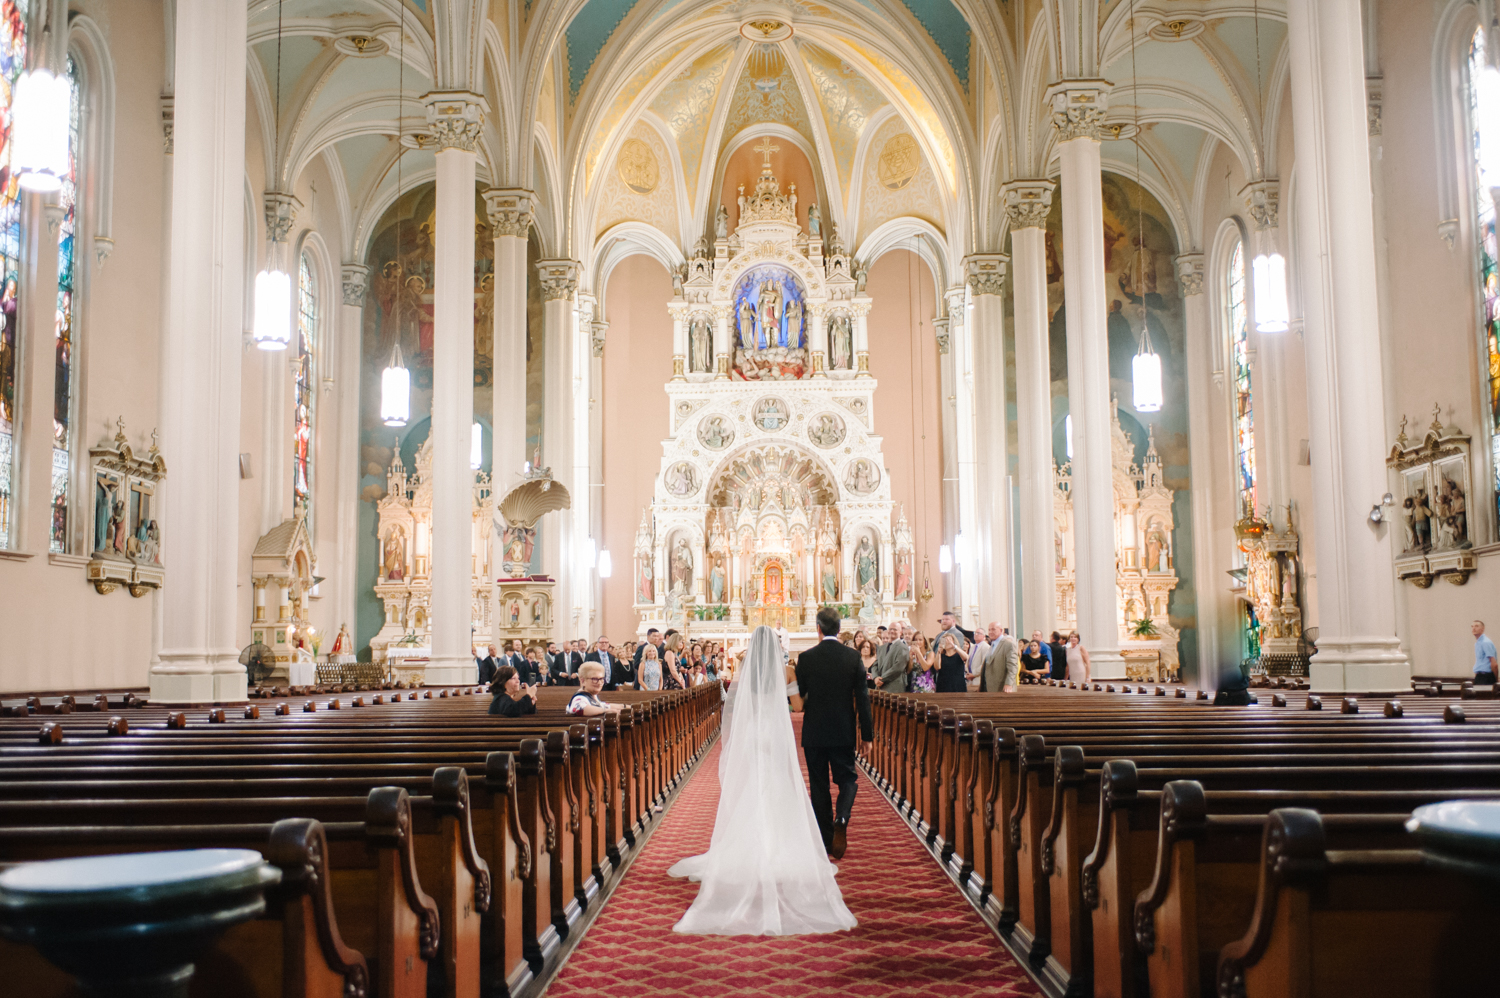 Wedding at St. Michael in Old Town Chicago, Midwest wedding photographer